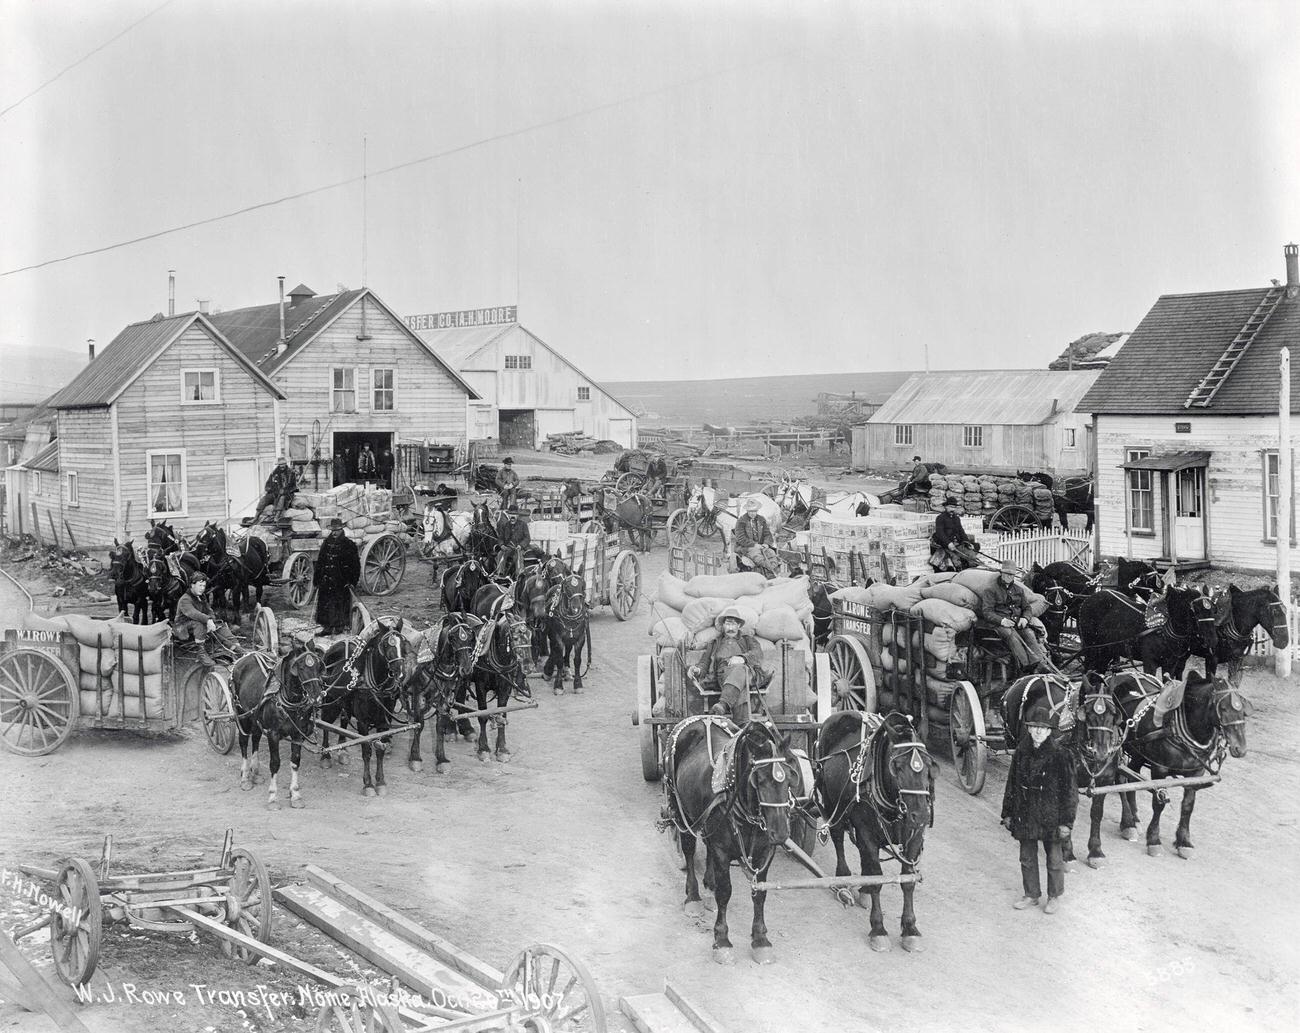 Teams of horses with wagons in Nome, Alaska, during the Klondike Gold Rush.